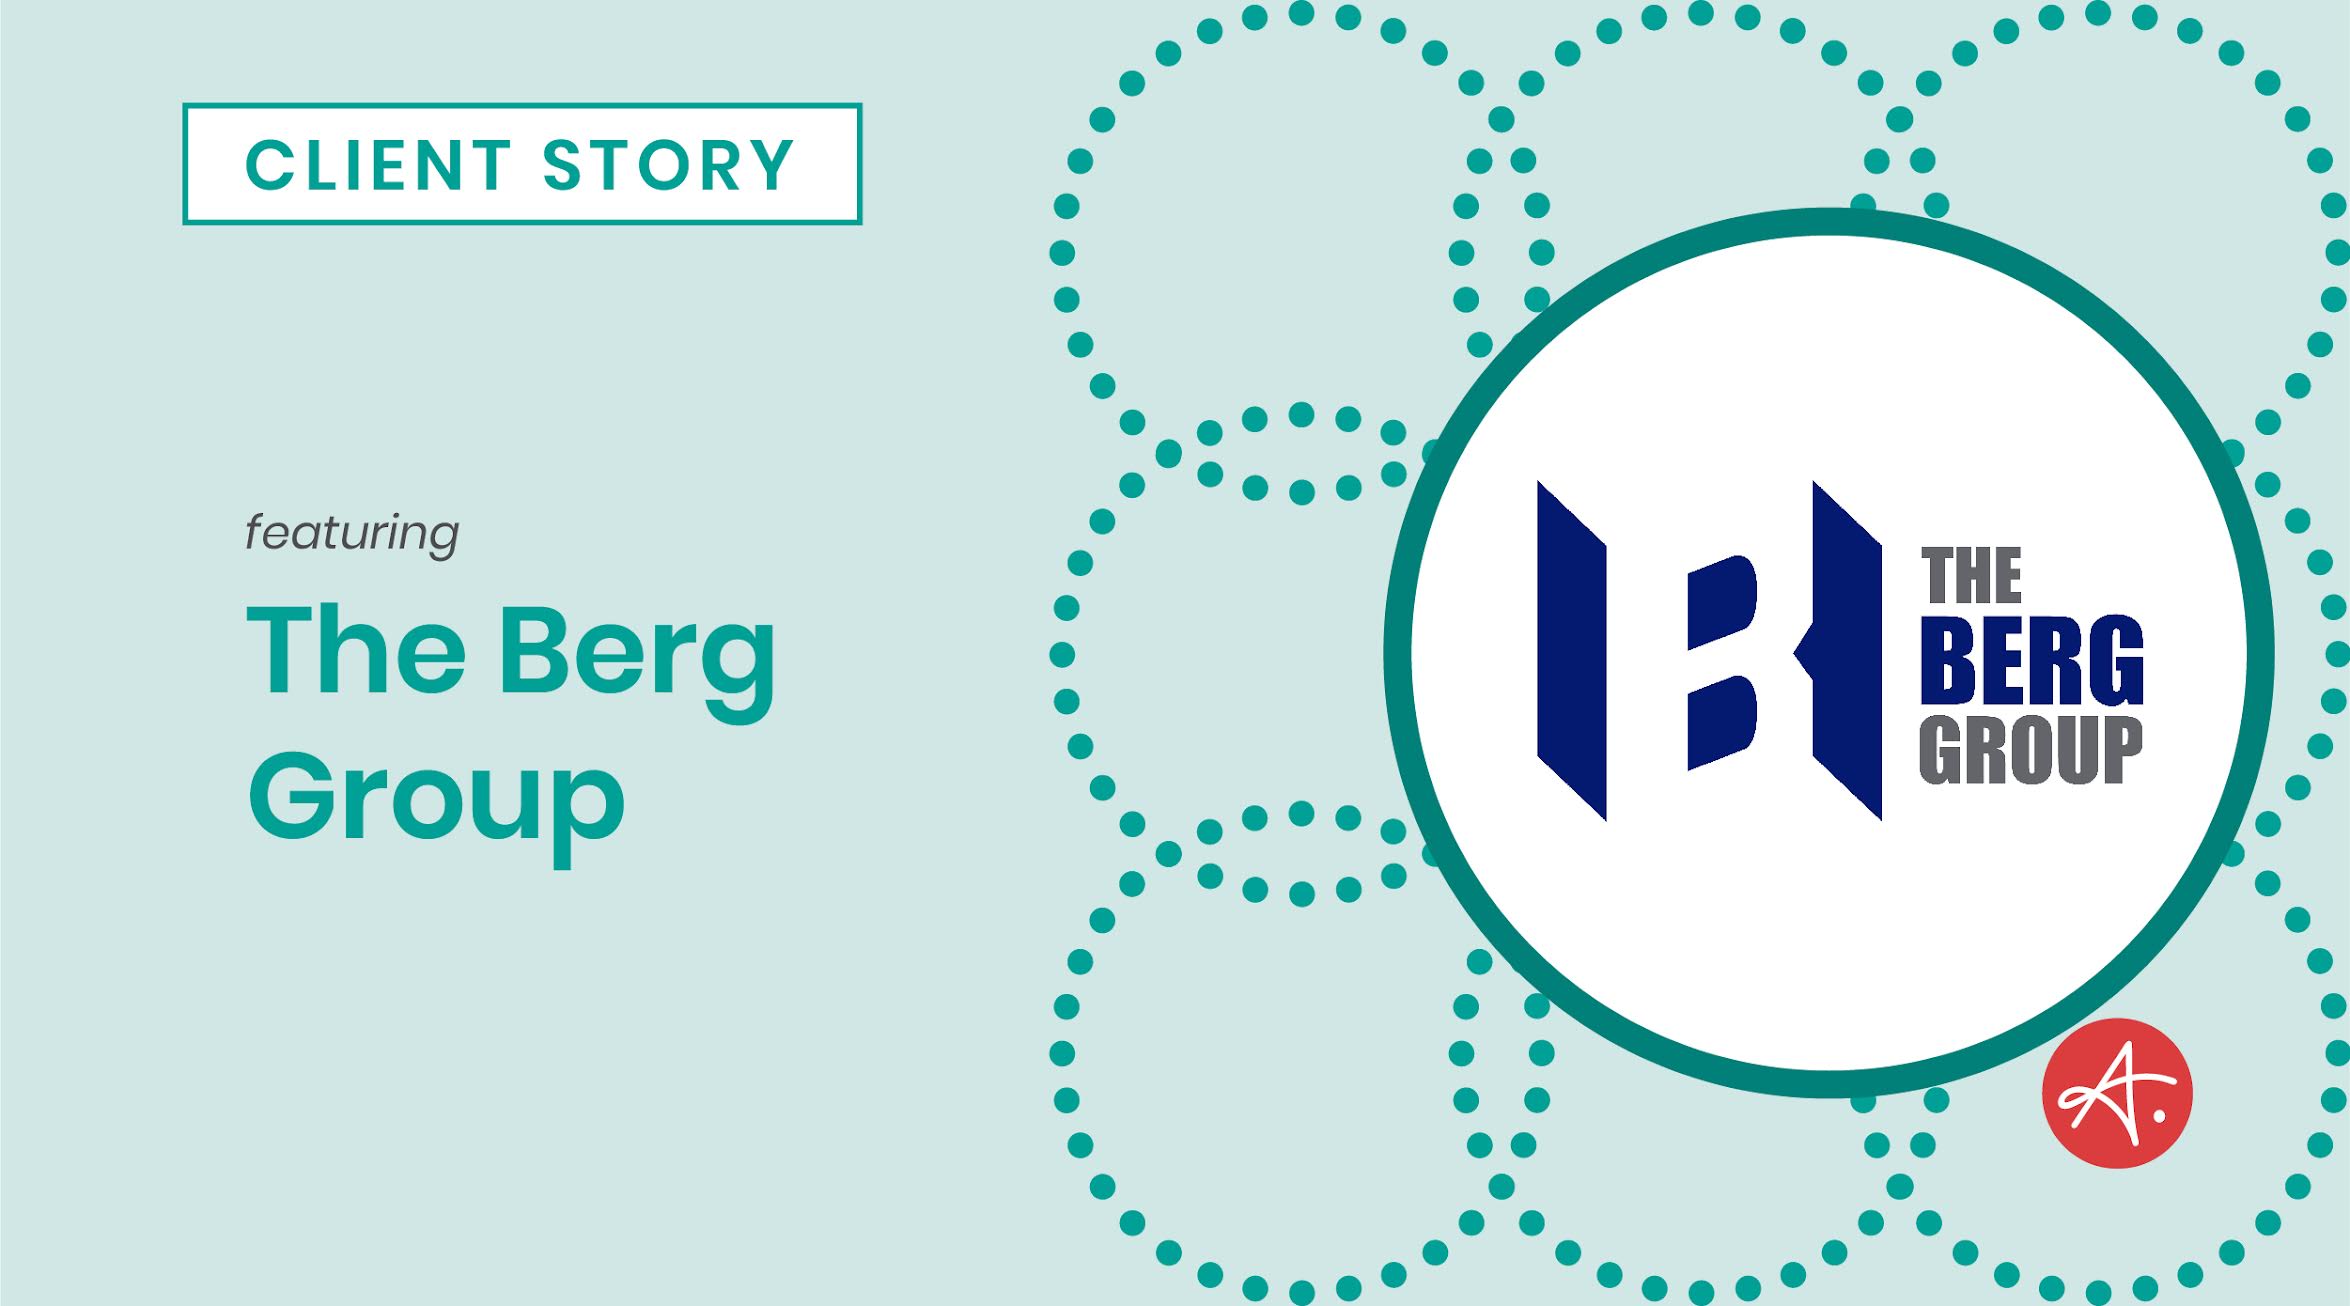 The Berg Group: Client Story